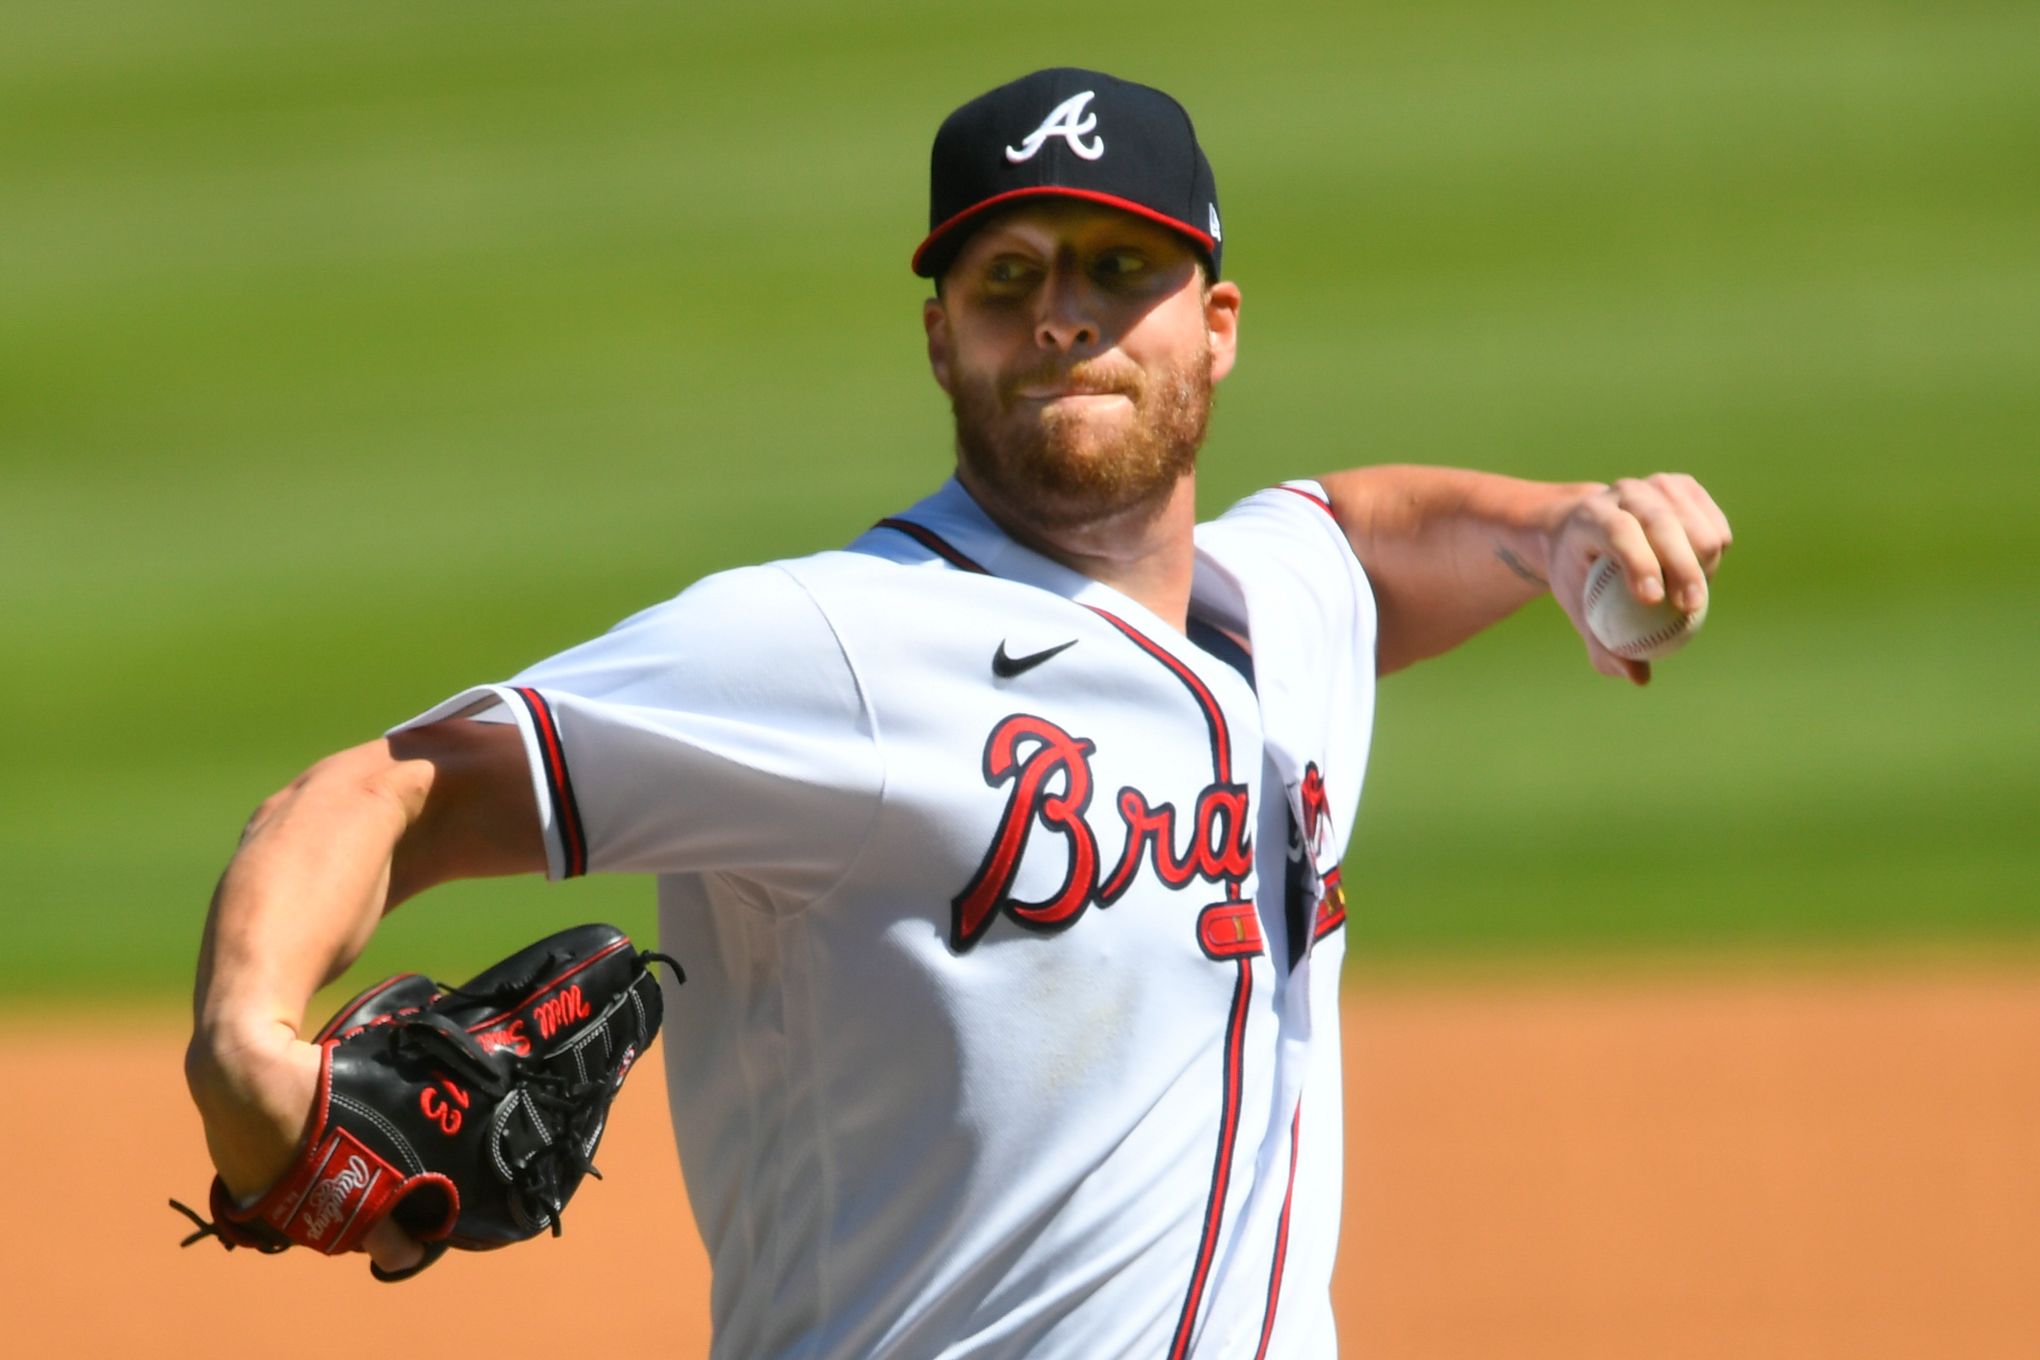 Braves rotation will be tested with Max Fried, Kyle Wright likely